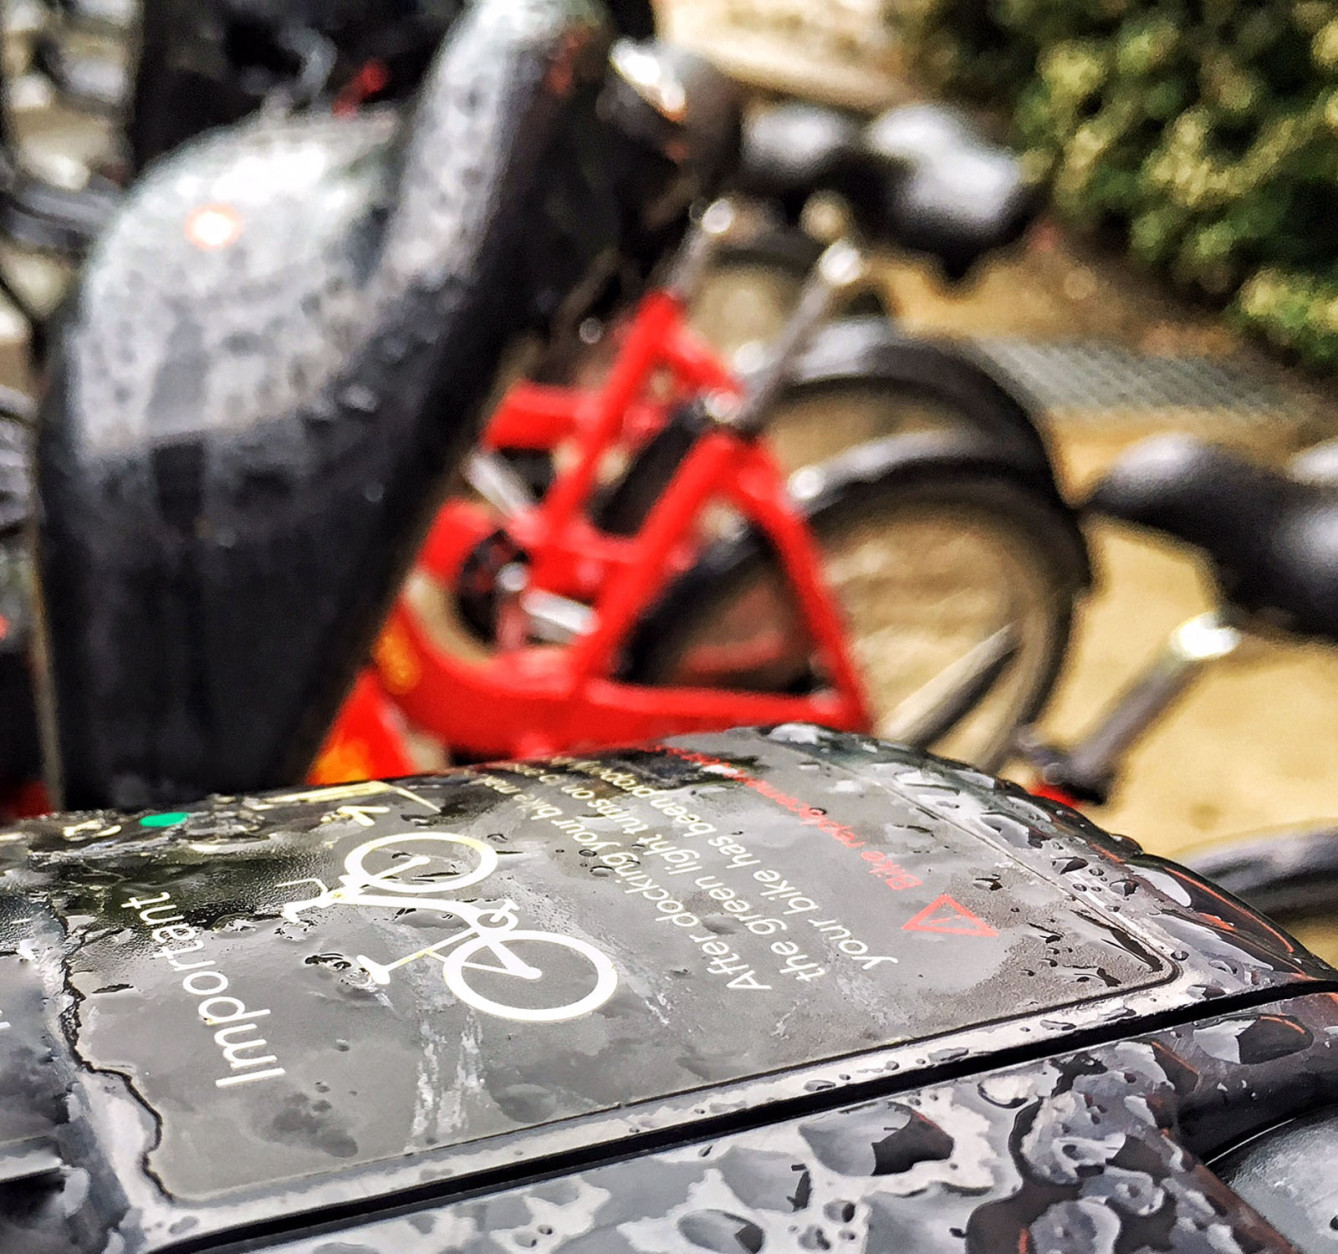 Capital Bikeshare stations are all over the city, reaching Rockville, Maryland and Alexandria, Virginia. (WTOP/Kate Ryan)